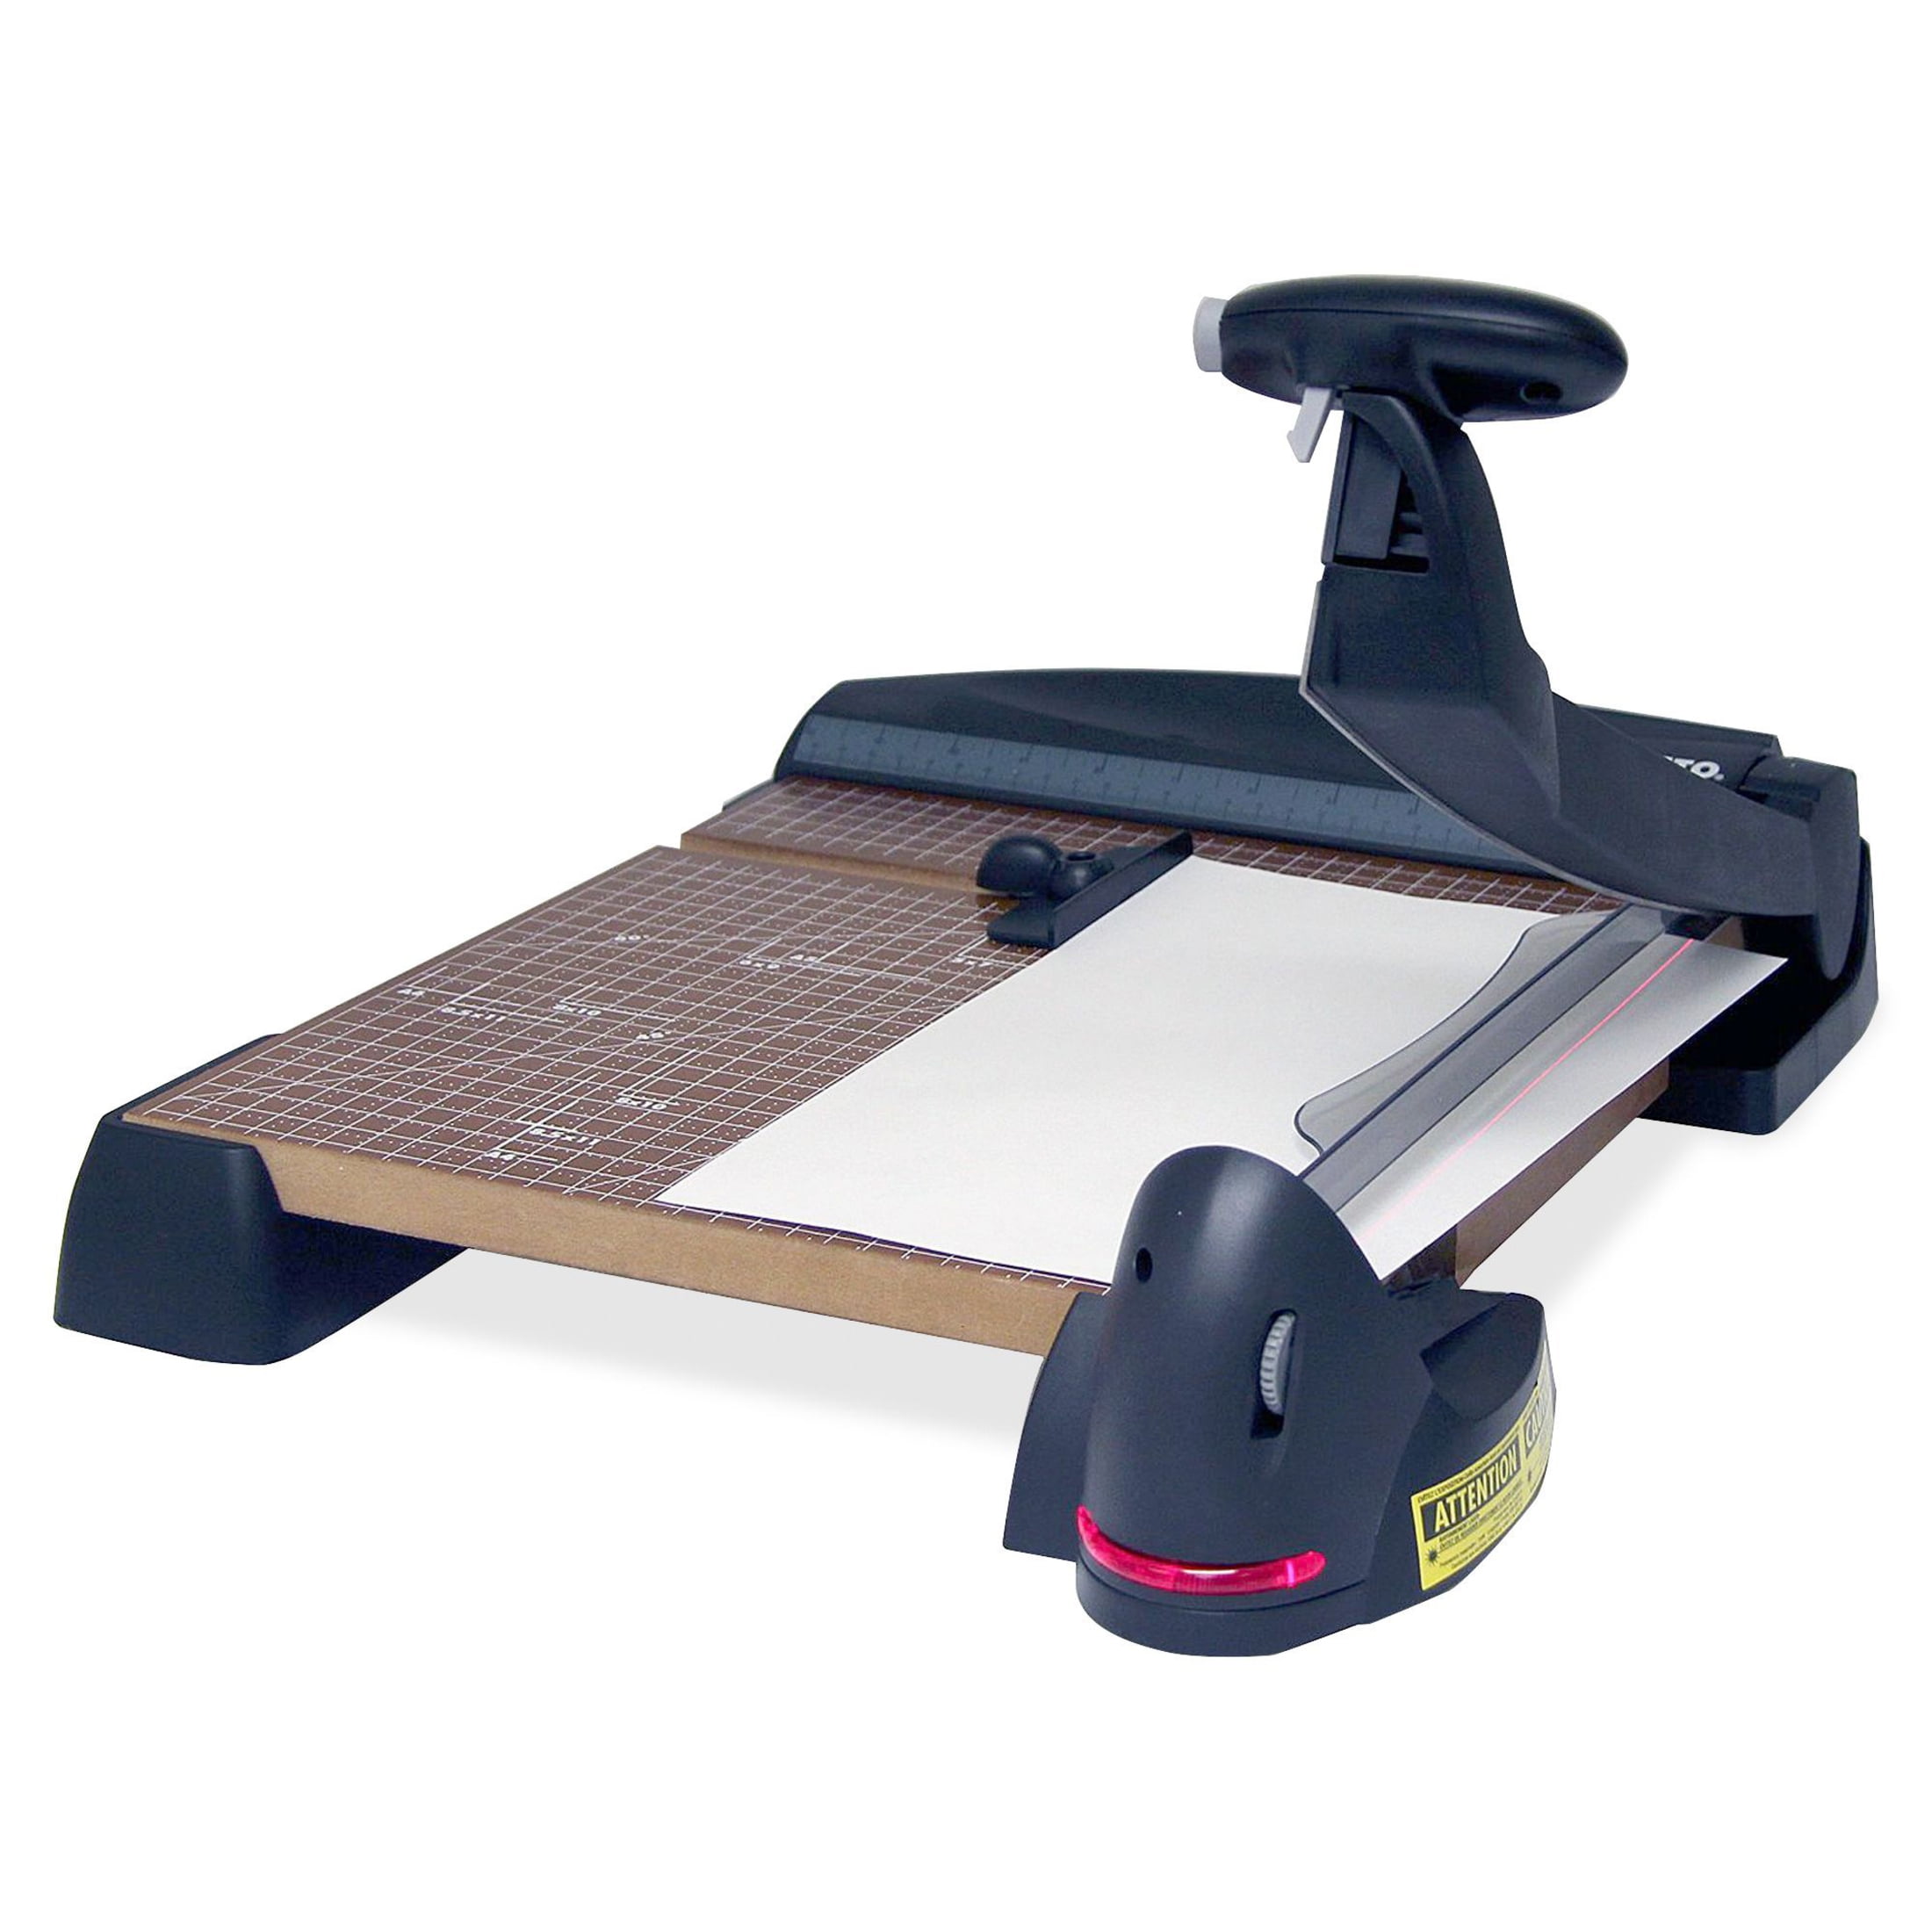 X-Acto 12 Heavy Duty Wood Guillotine Paper Cutter - 26312 